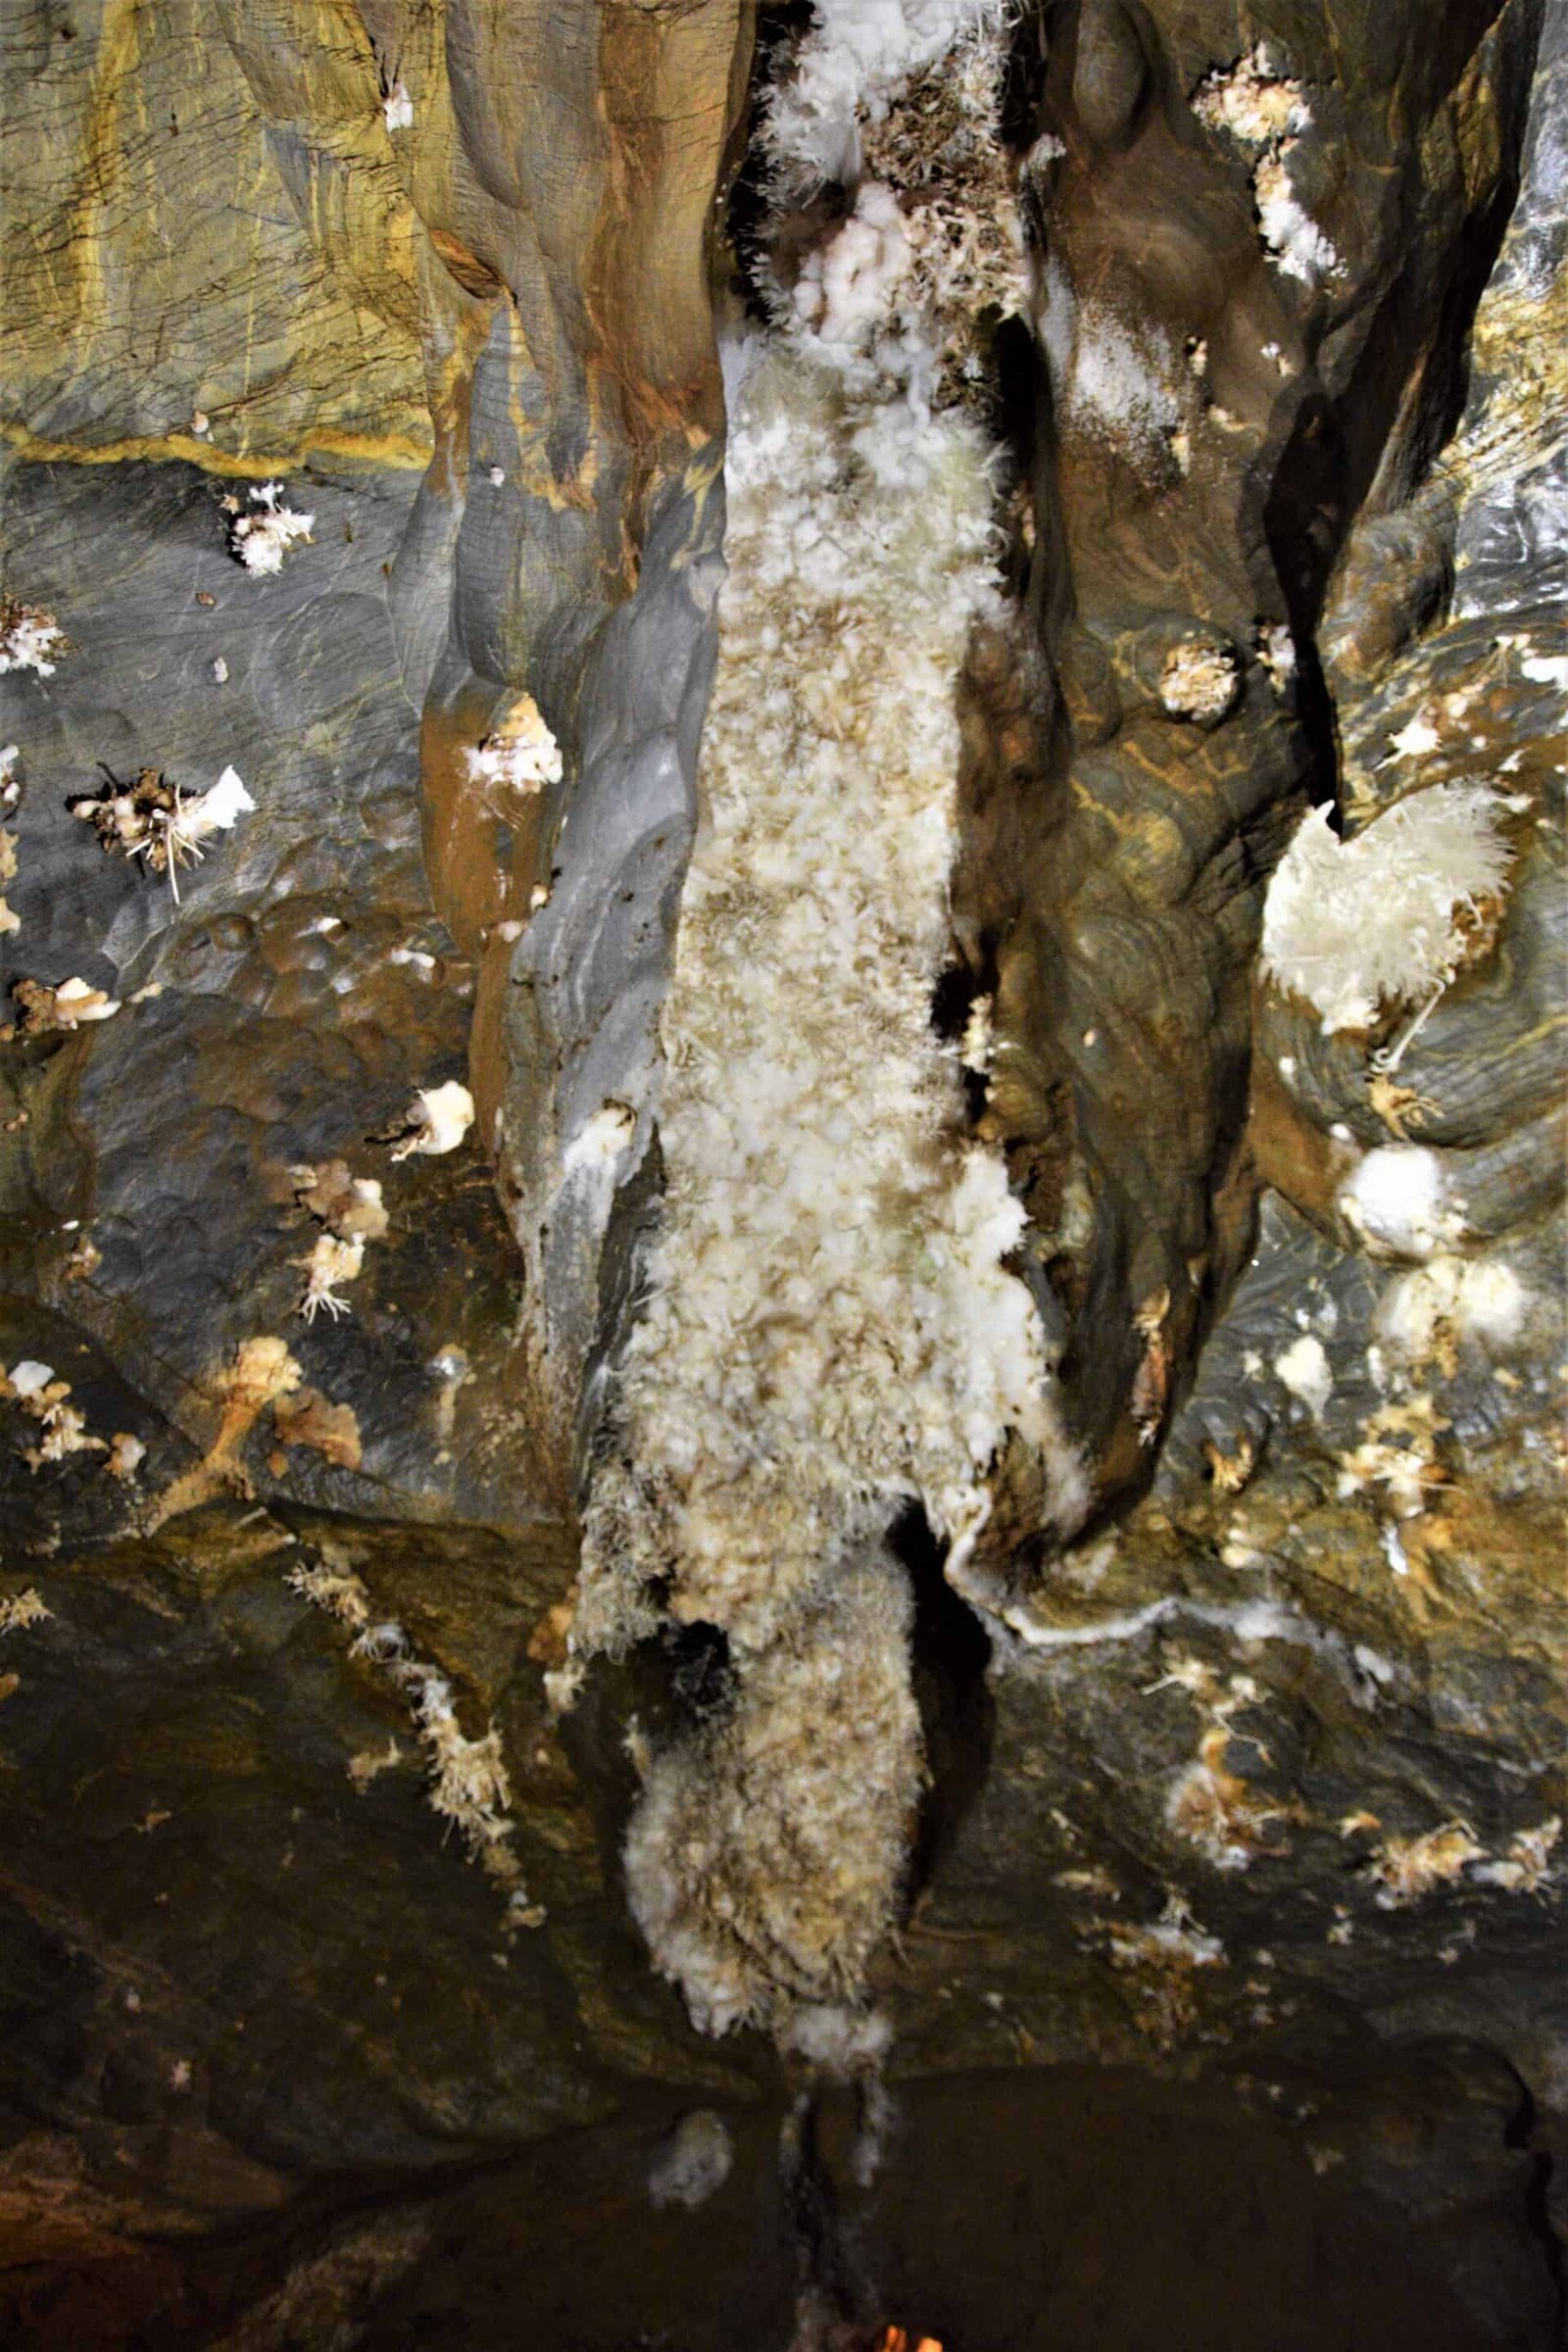 massive white Aragonite structure growing inside a crevice in the cave ceiling resembling mould surrounded by blue marble and smaller Aragonite clusters growing out of holes